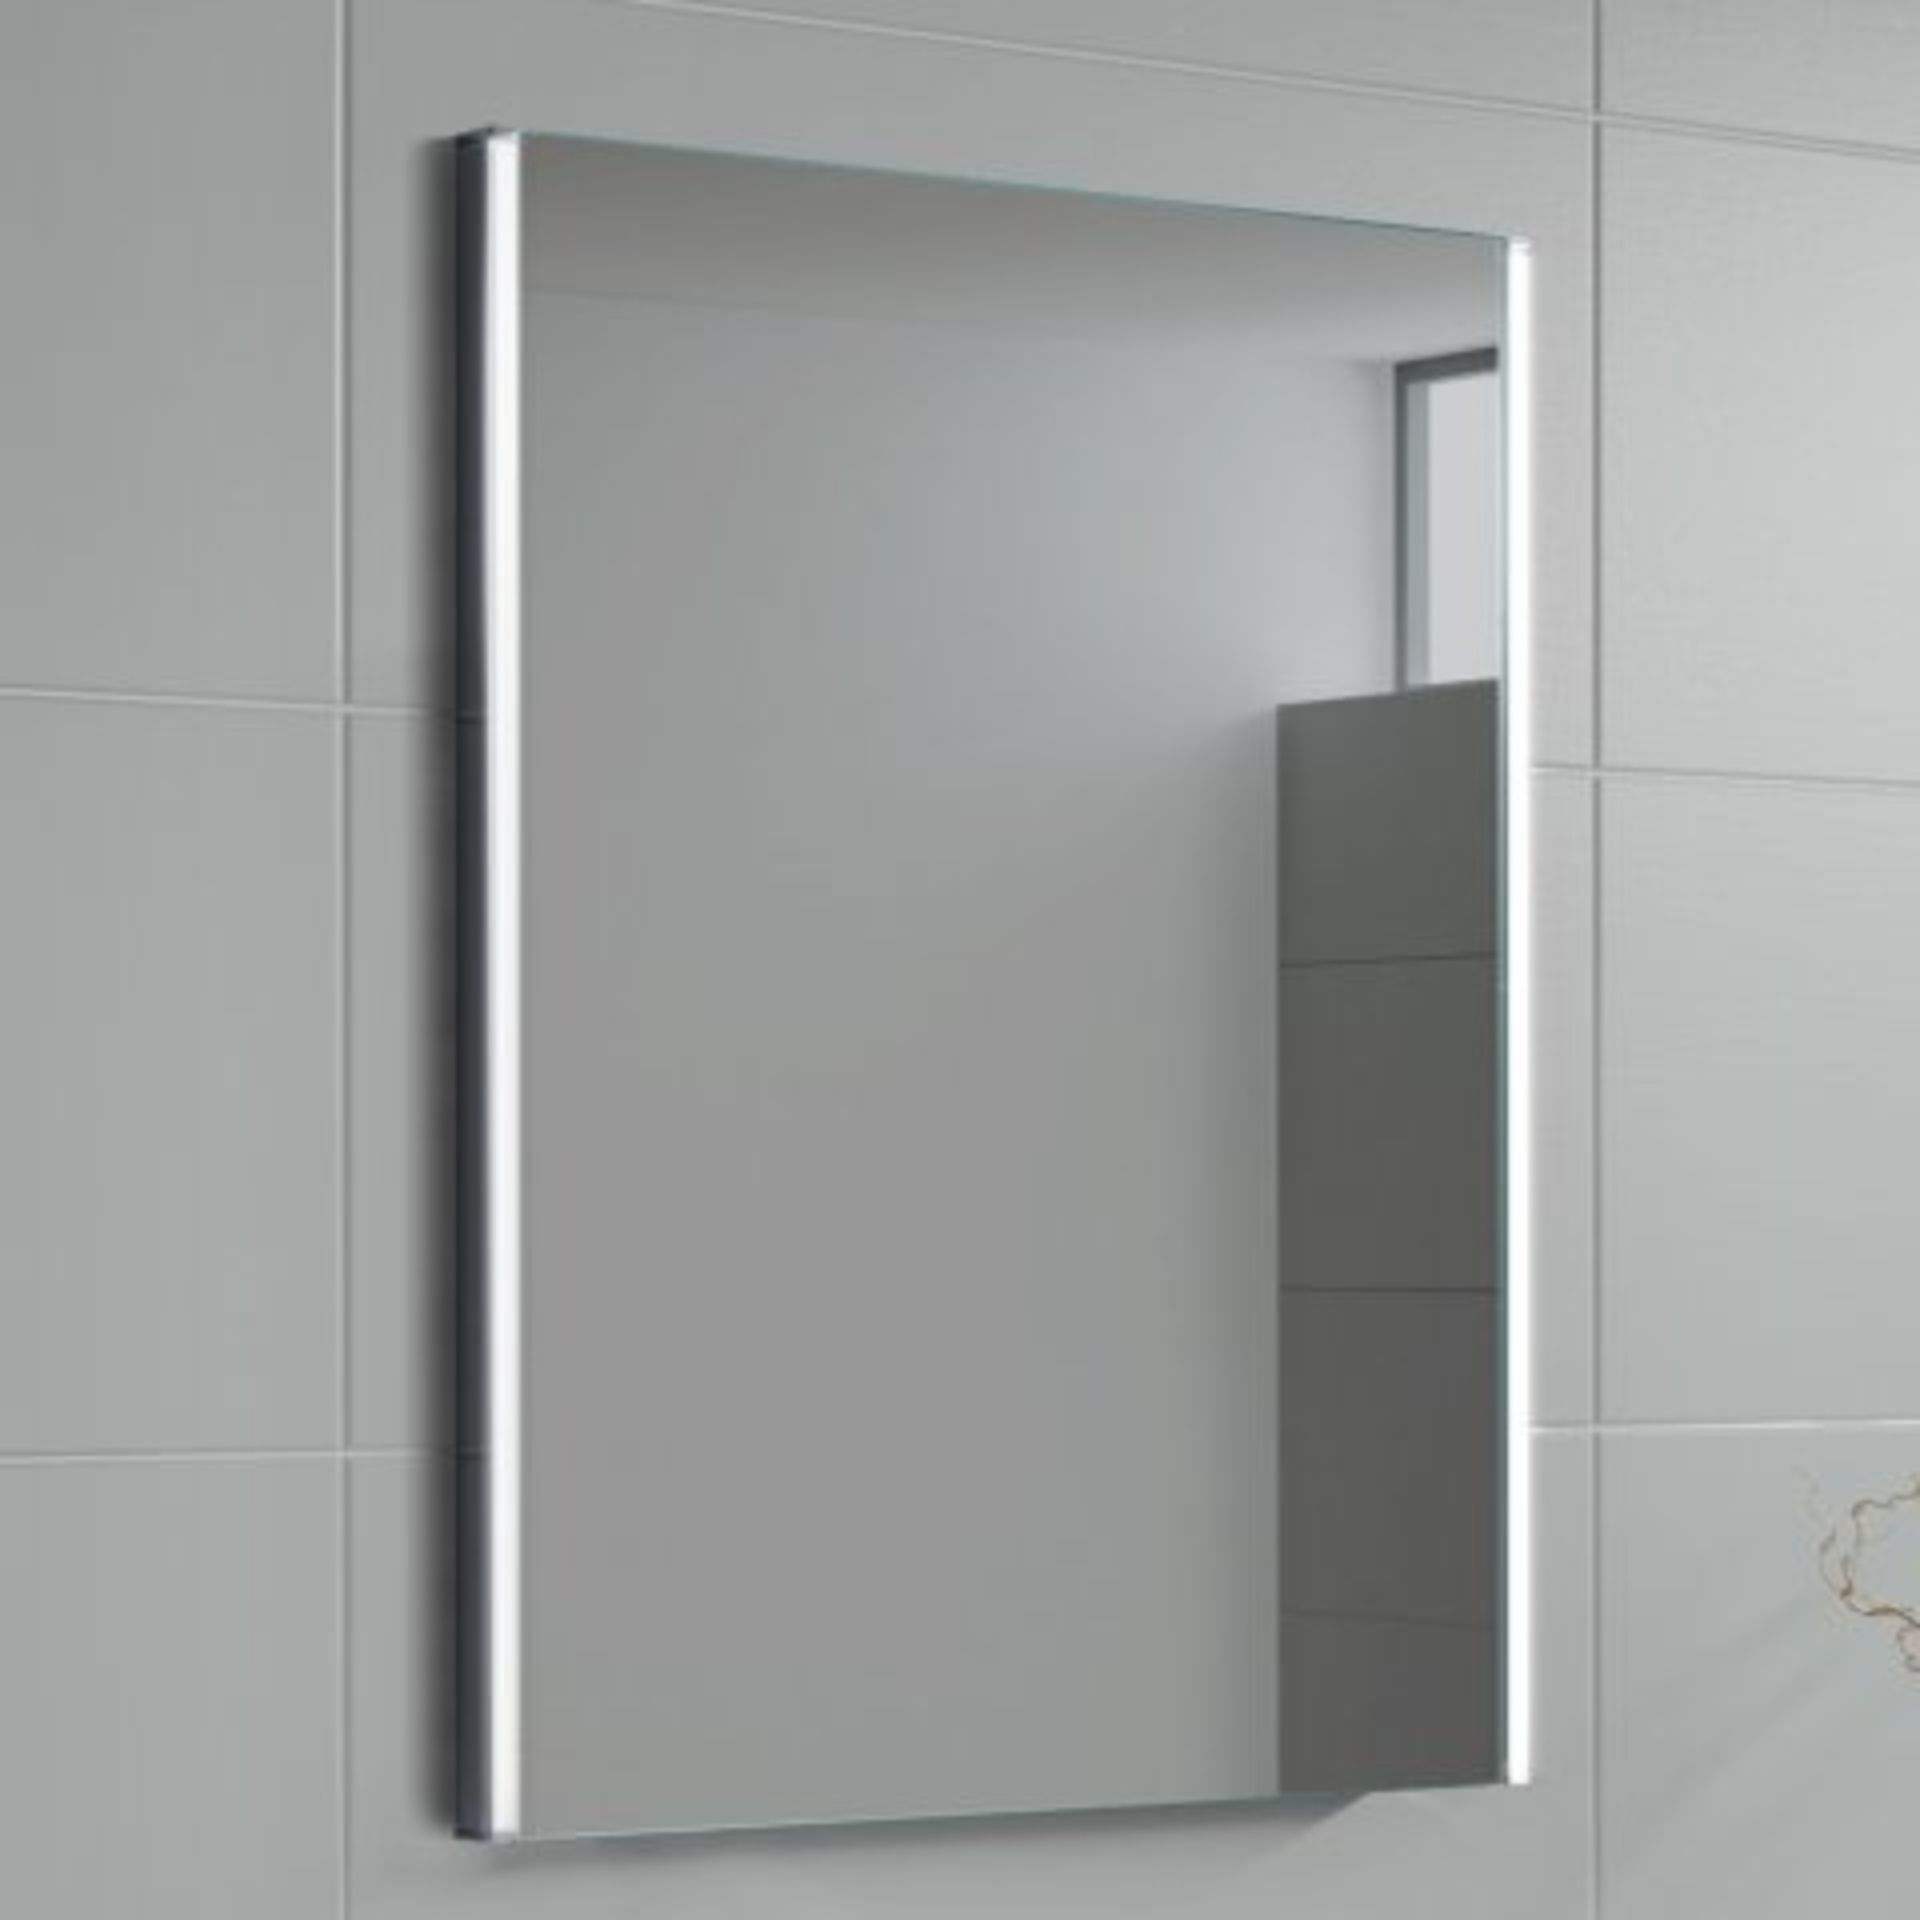 (L130) 700x500mm Lunar Illuminated LED Mirror RRP £349.99. Our Lunar range of mirrors comprises of - Image 2 of 8